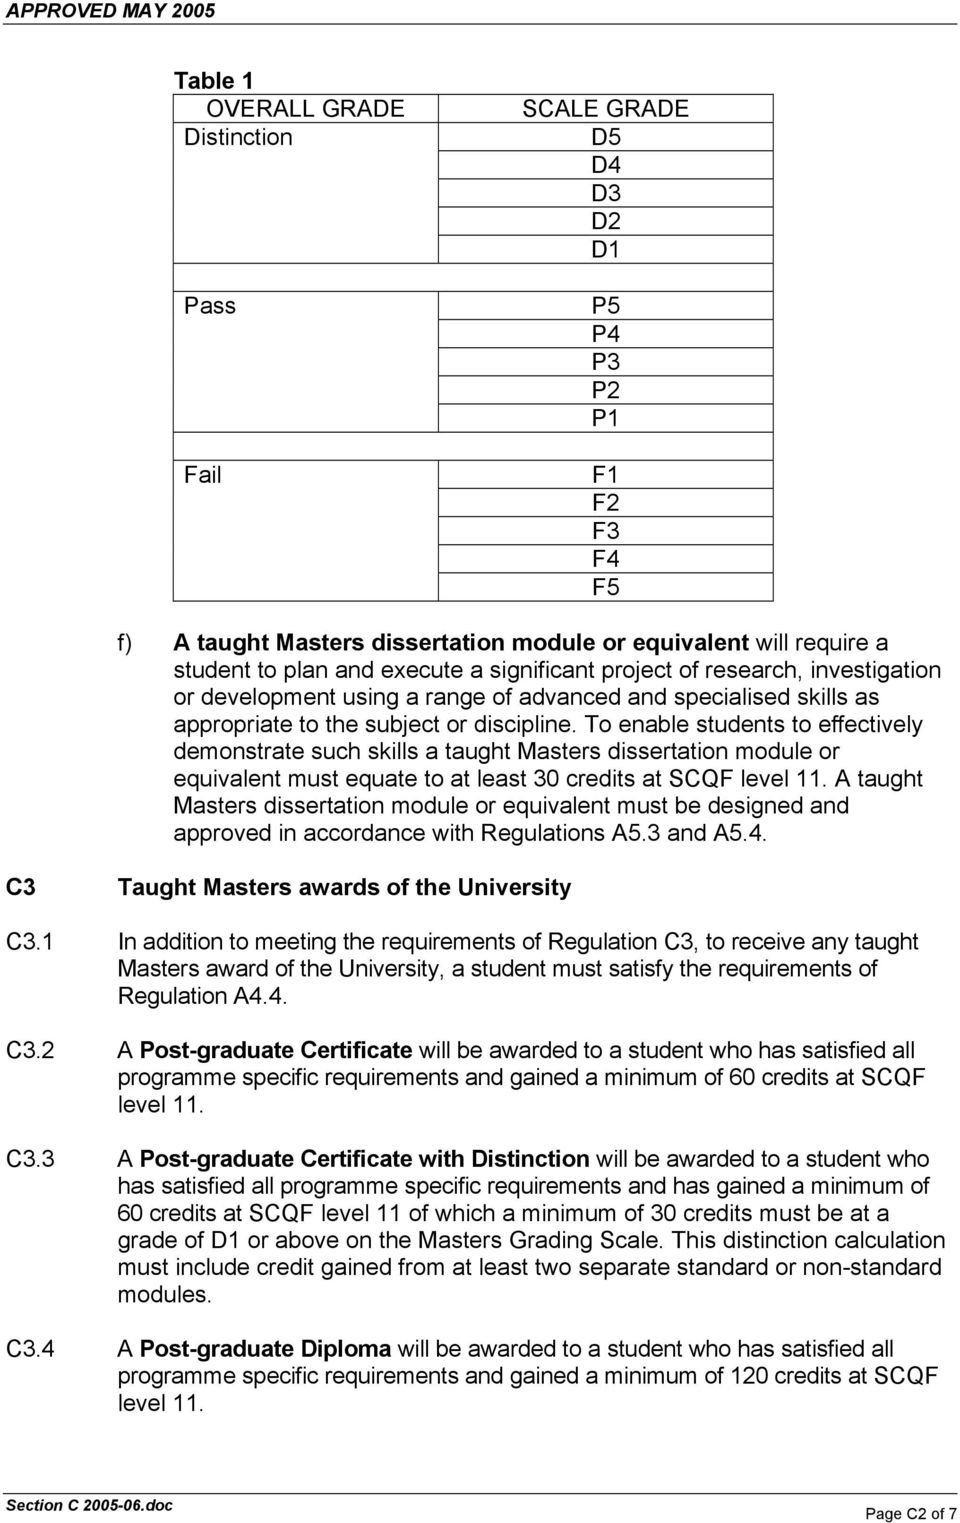 To enable students to effectively demonstrate such skills a taught Masters dissertation module equivalent must equate to at least 30 credits at SCQF level 11.